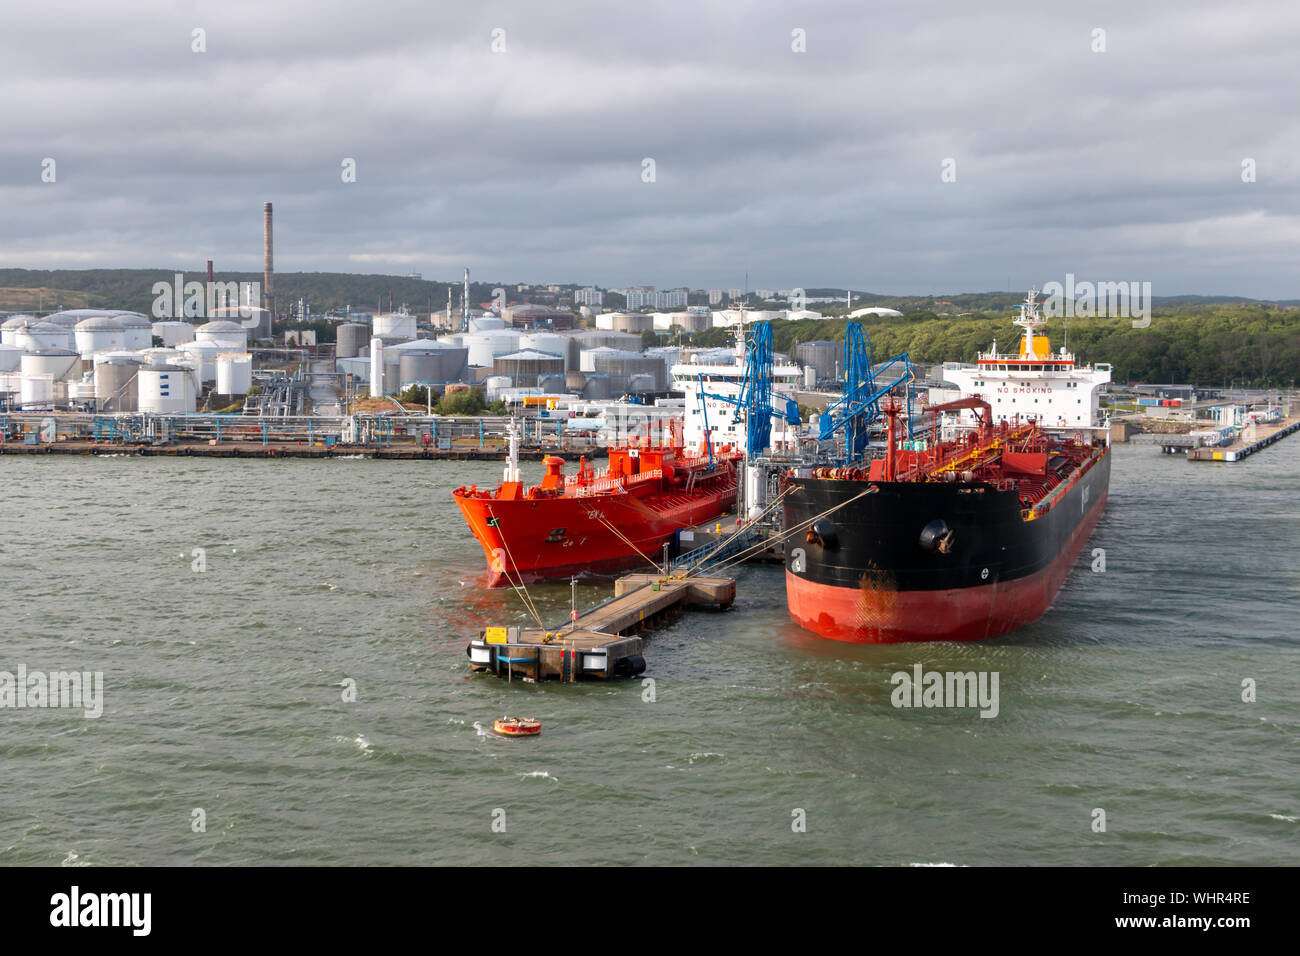 Tank farm in Gothenburg Sweden, cargo ships are in dock to load or unload their freight Stock Photo